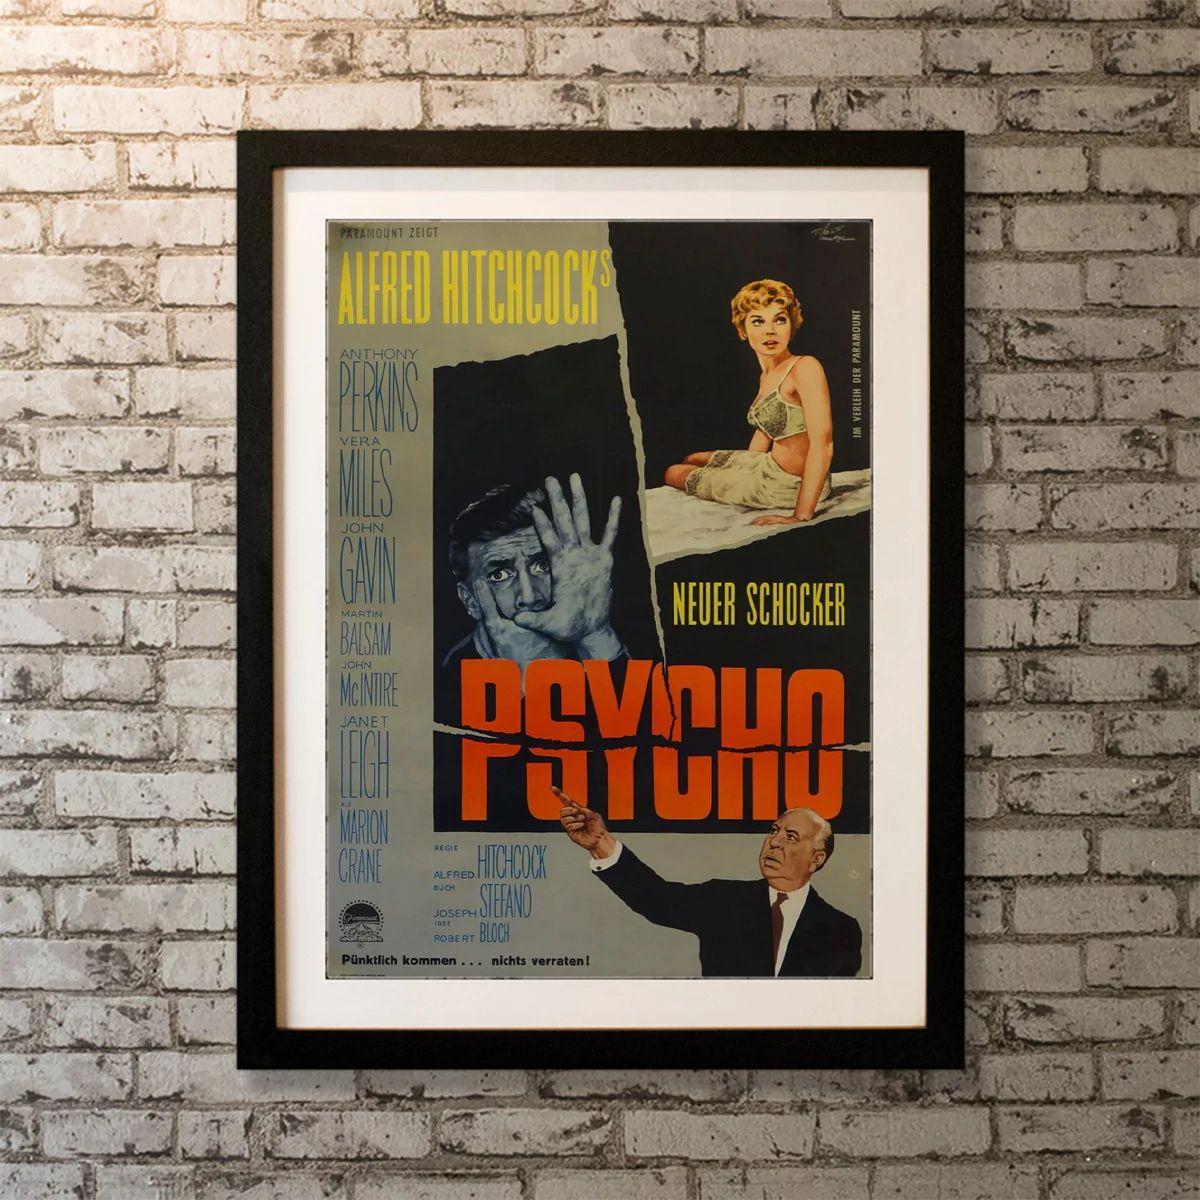 Psycho, Unframed Poster, 1960

A Phoenix secretary embezzles $40,000 from her employer's client, goes on the run, and checks into a remote motel run by a young man under the domination of his mother.

Year: 1960
Nationality: German
Condition: